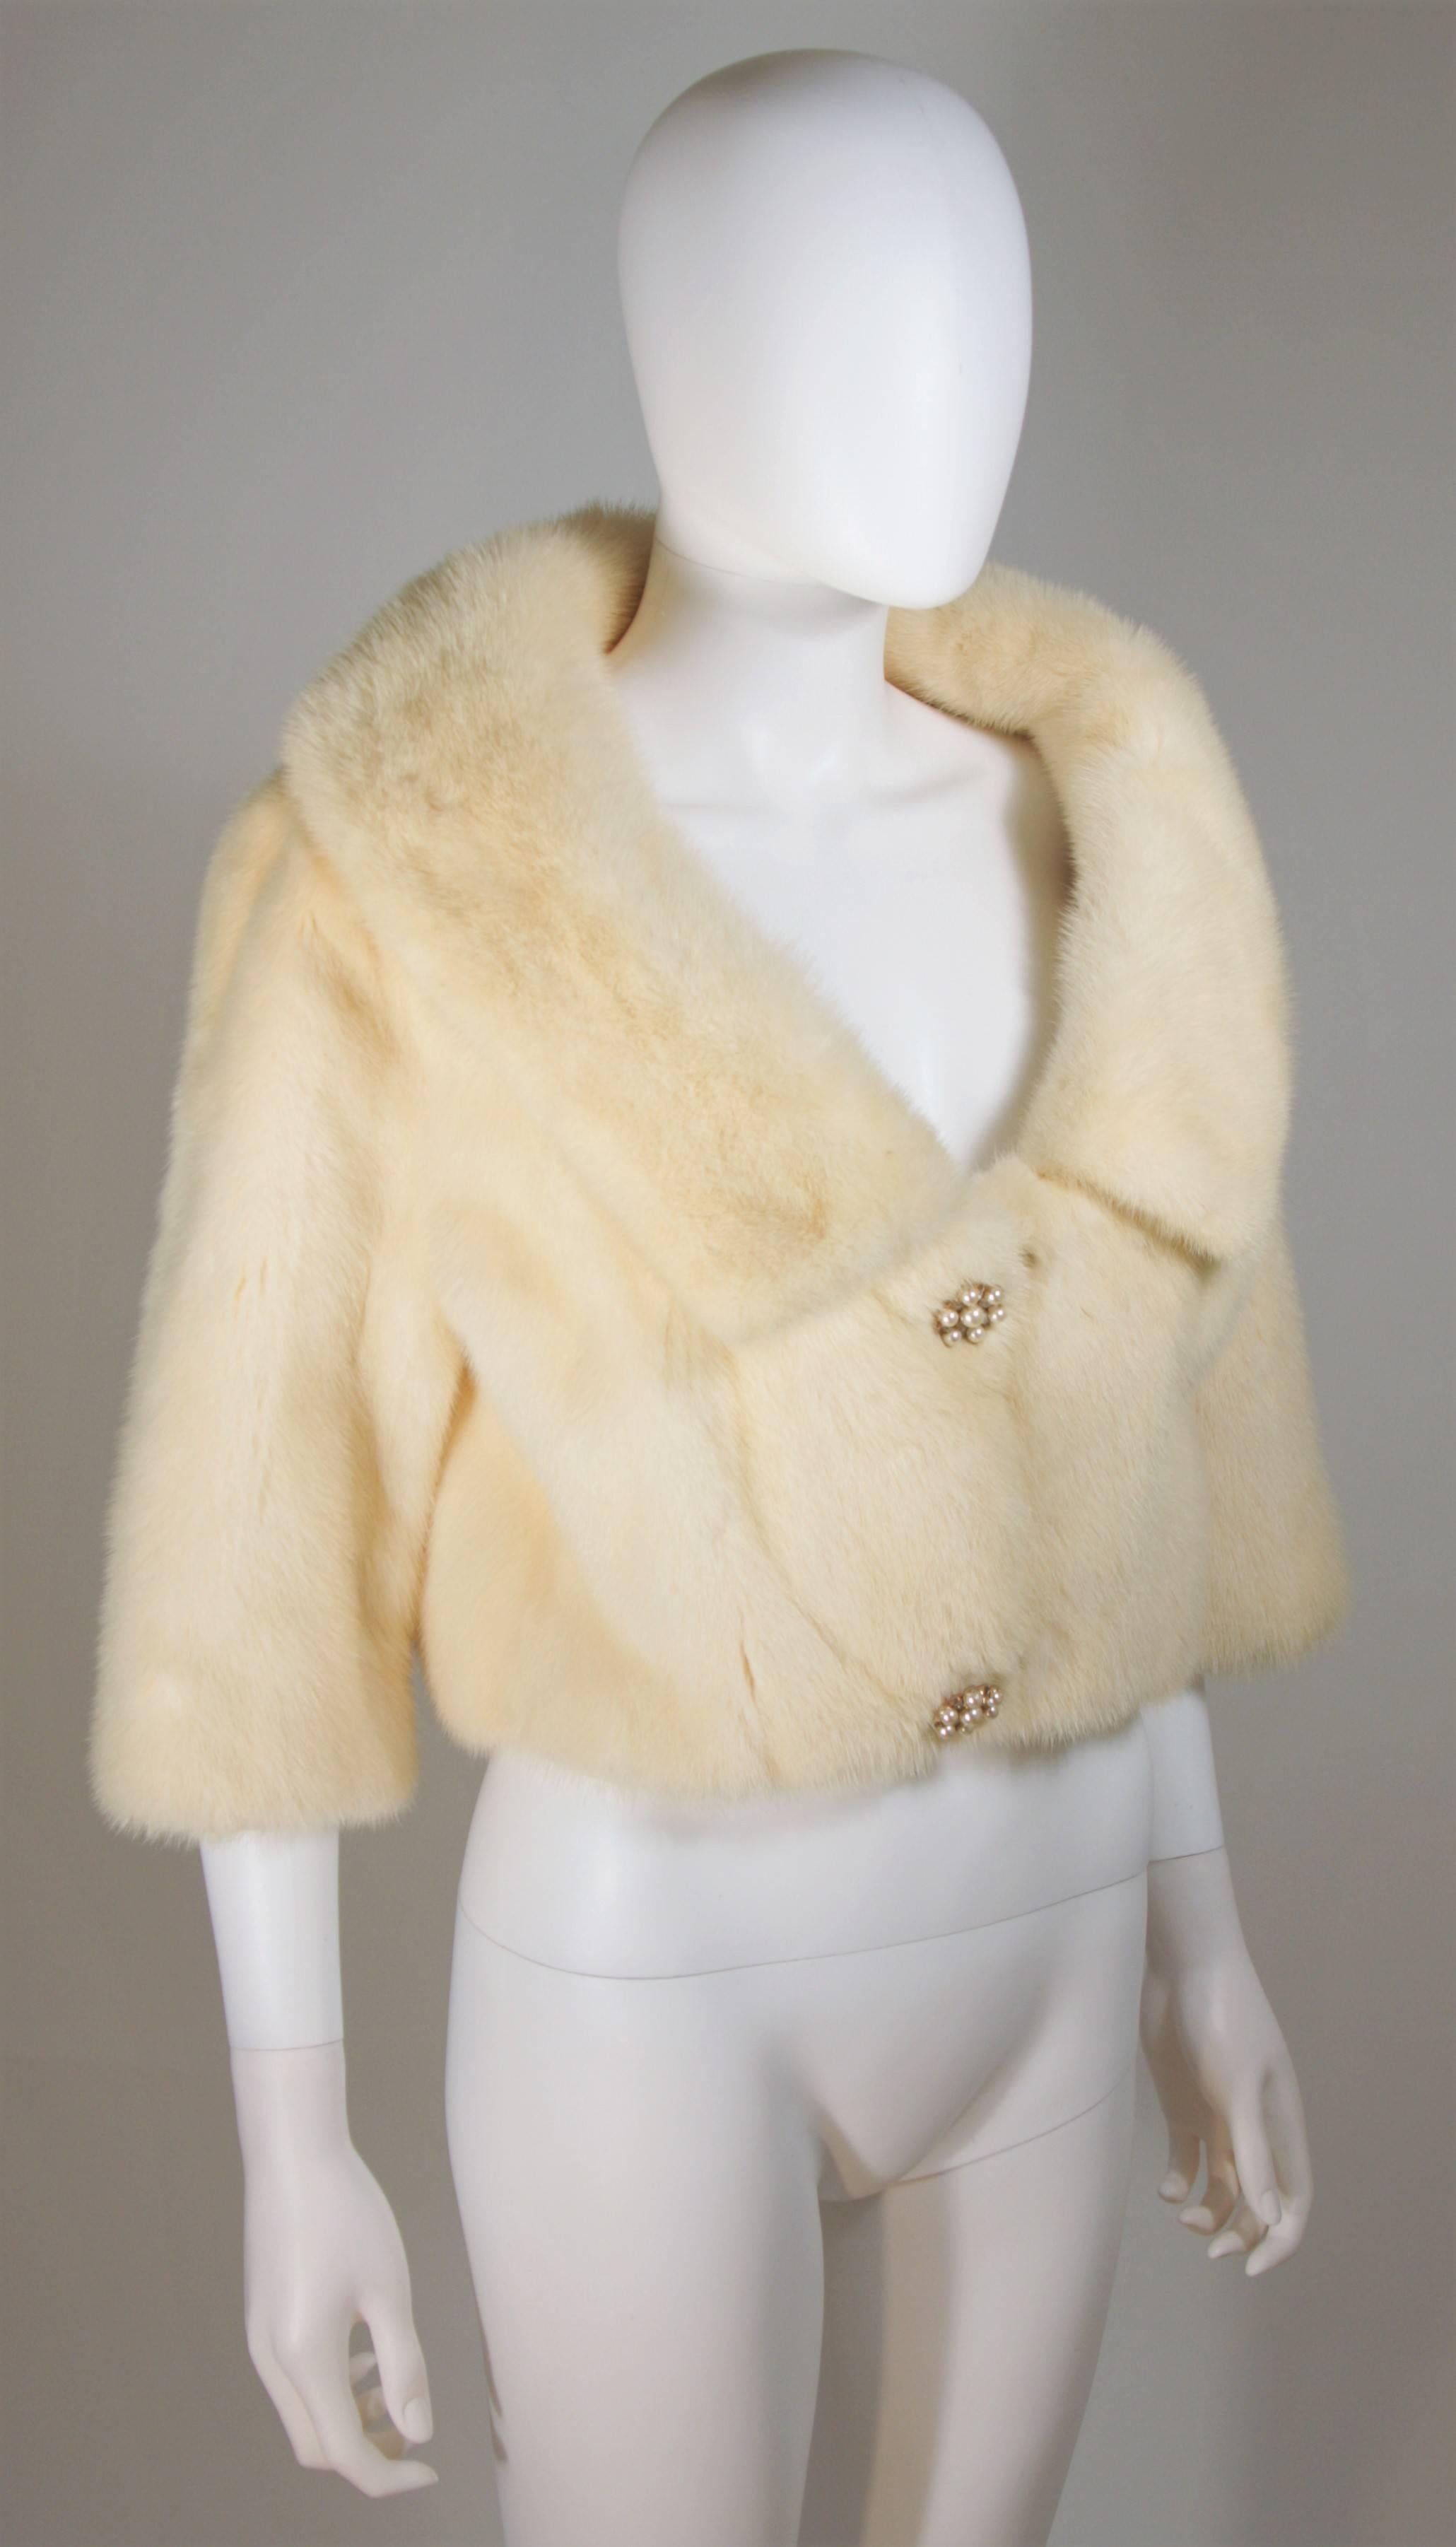 Women's OLEG CASSINI Cream Mink Jacket with Rhinestone & Faux Pearl Buttons Size 6-8 For Sale